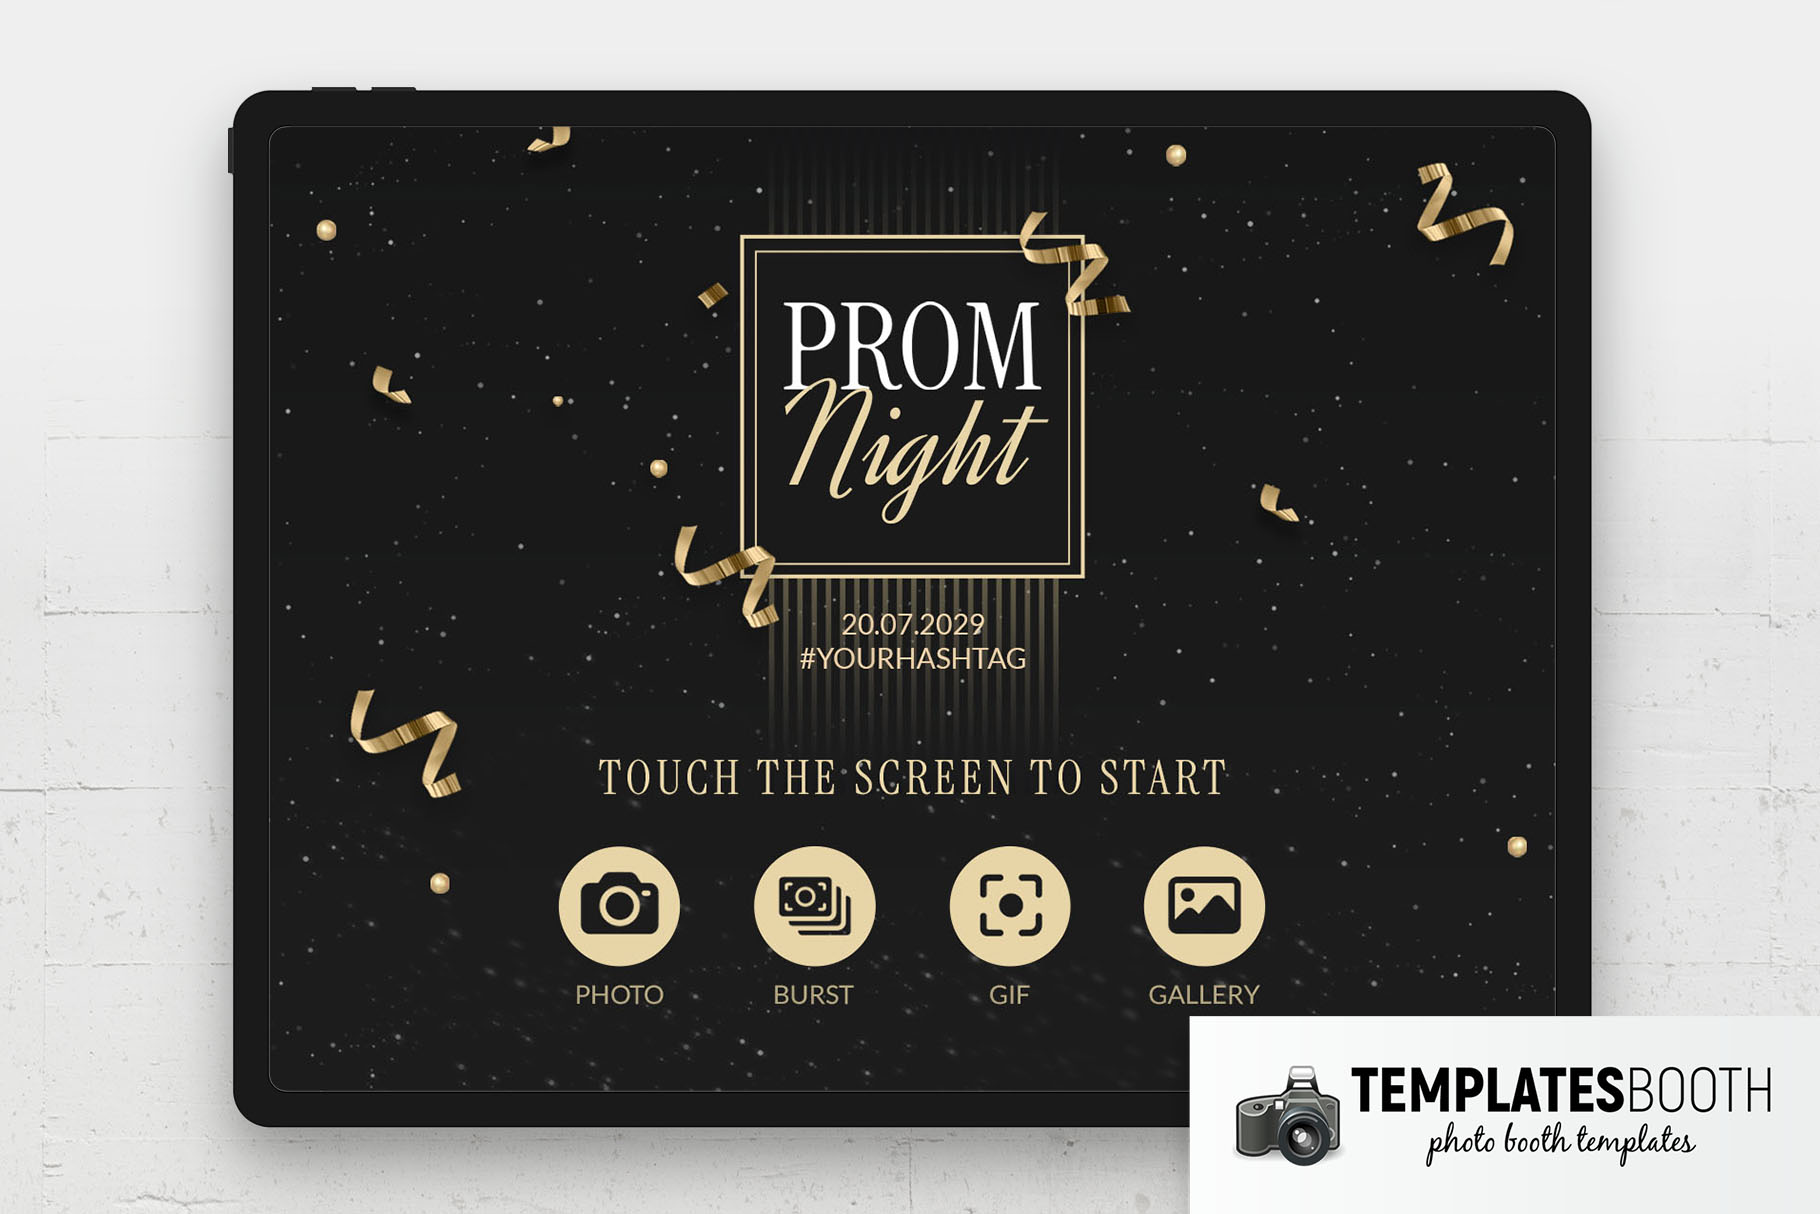 Prom Night Photo Booth Welcome Screen